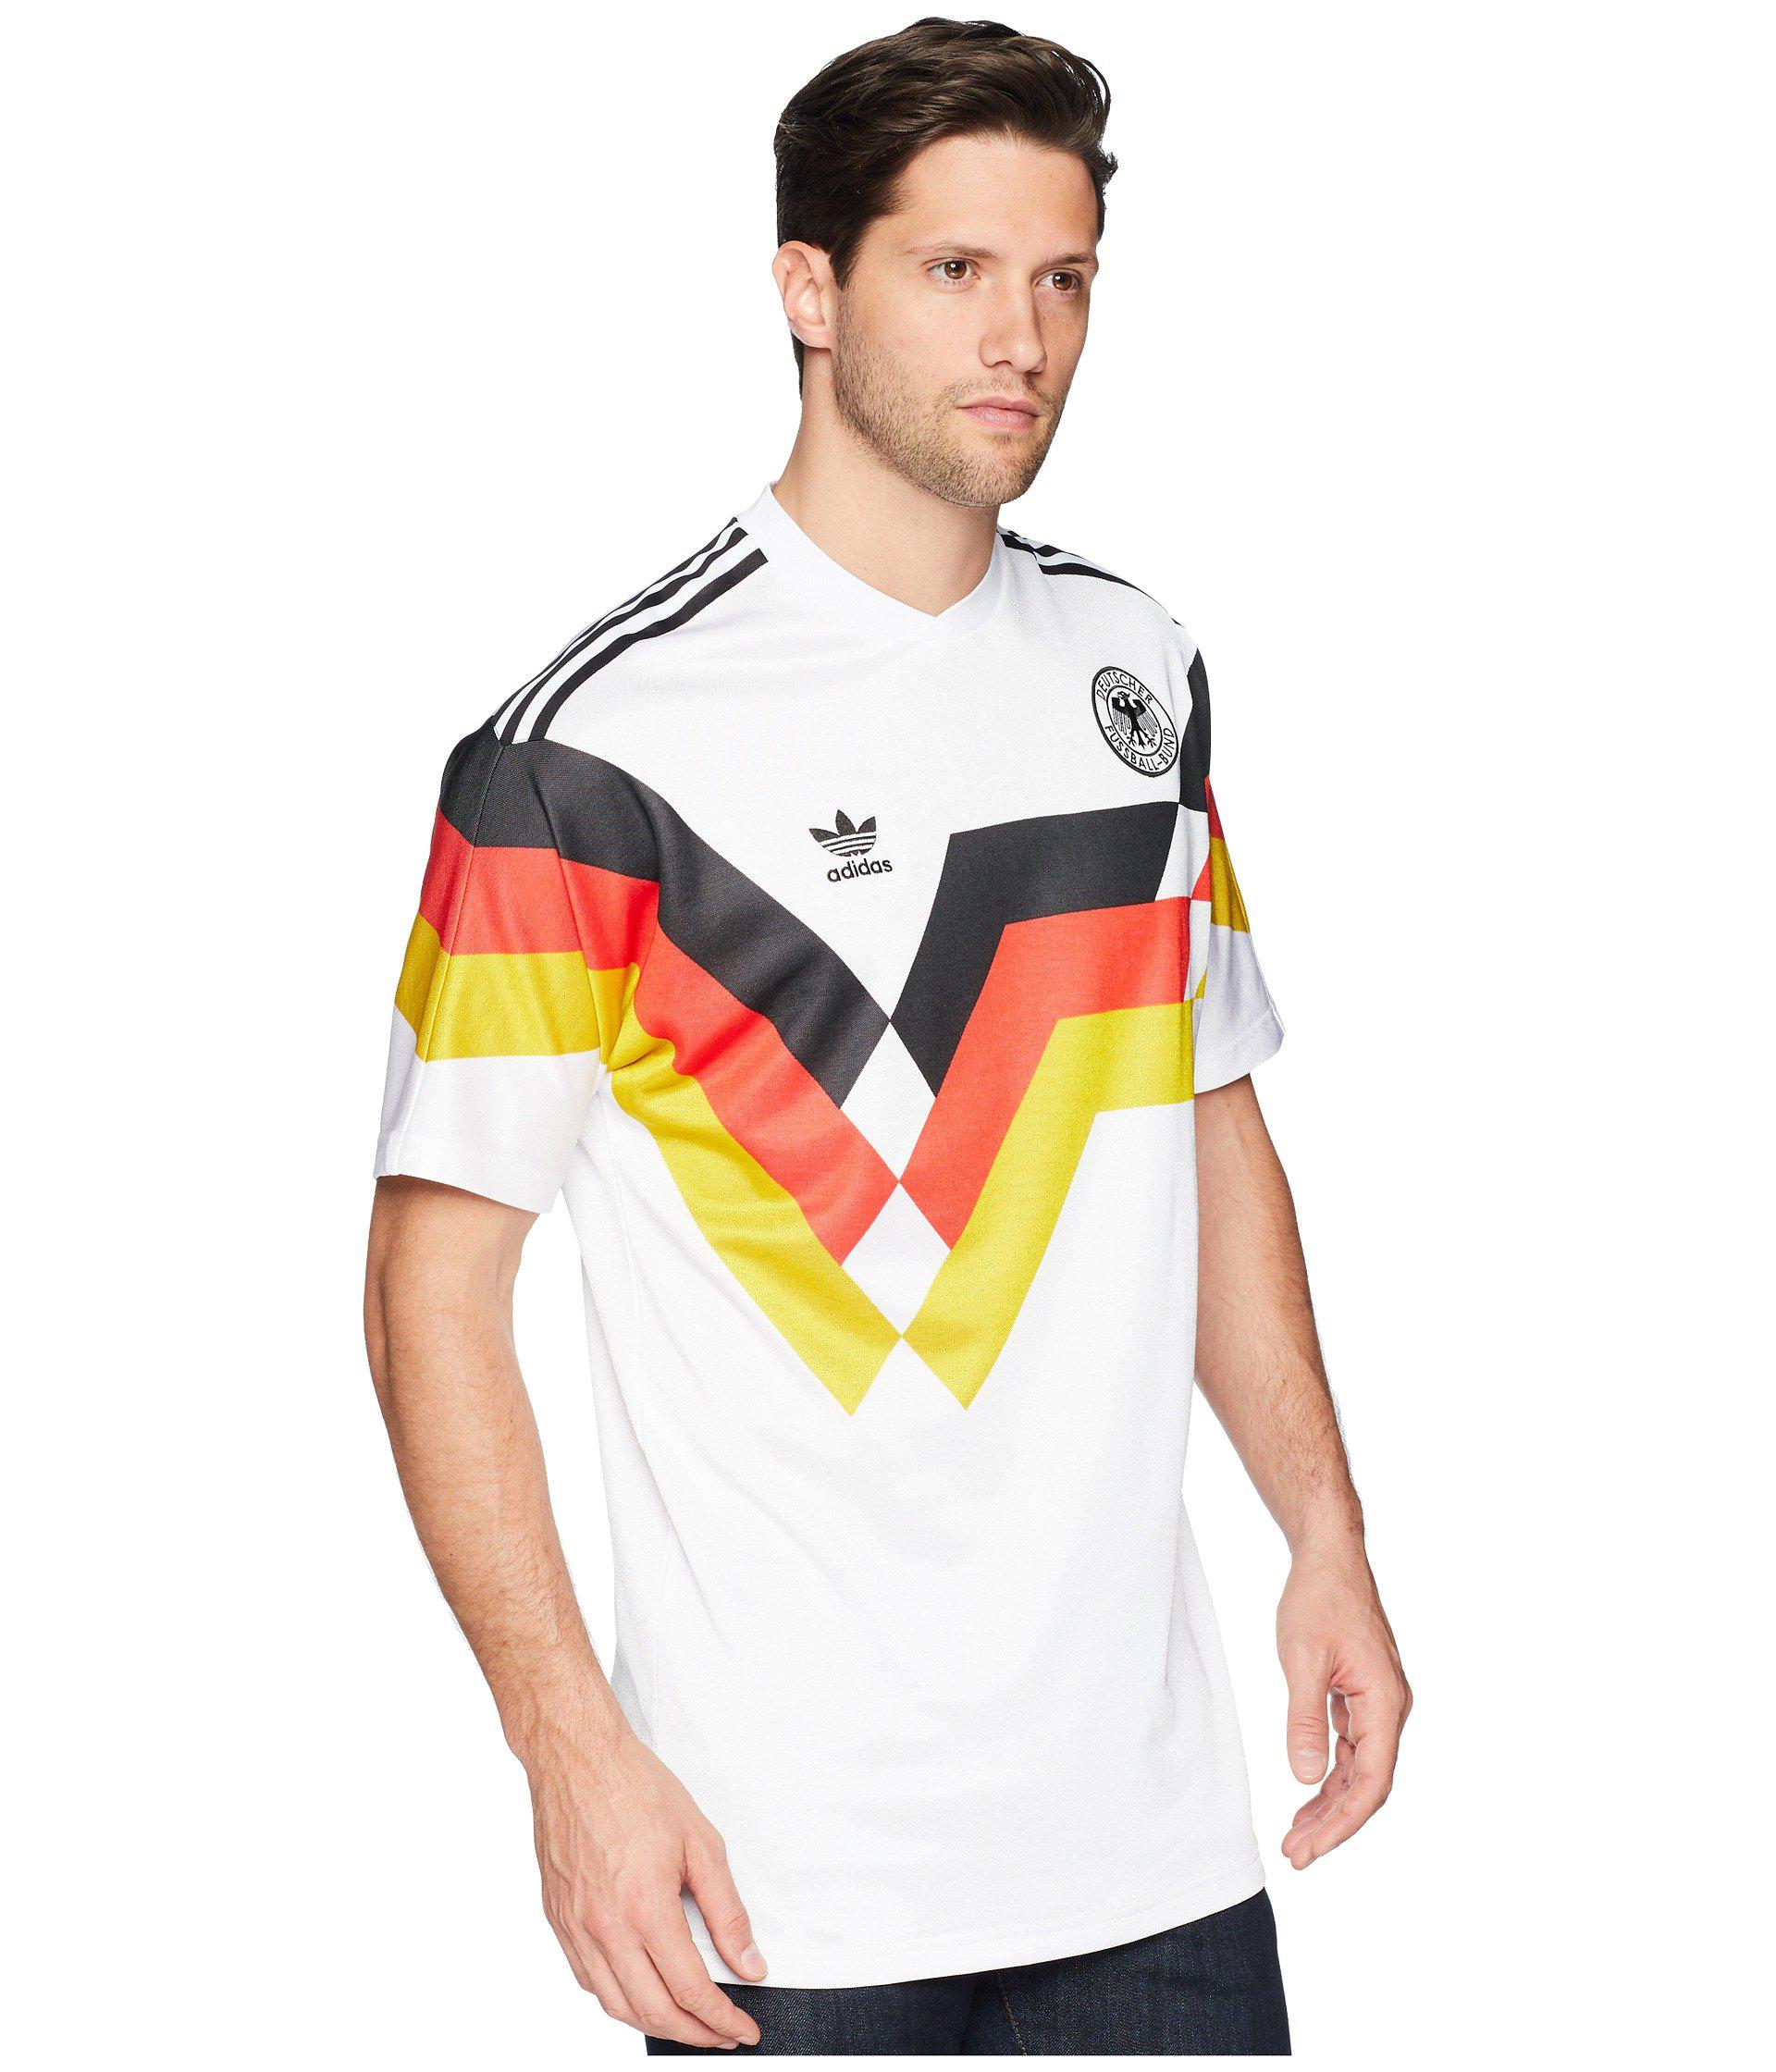 Lyst - Adidas Originals Germany 1990 Jersey in White for Men